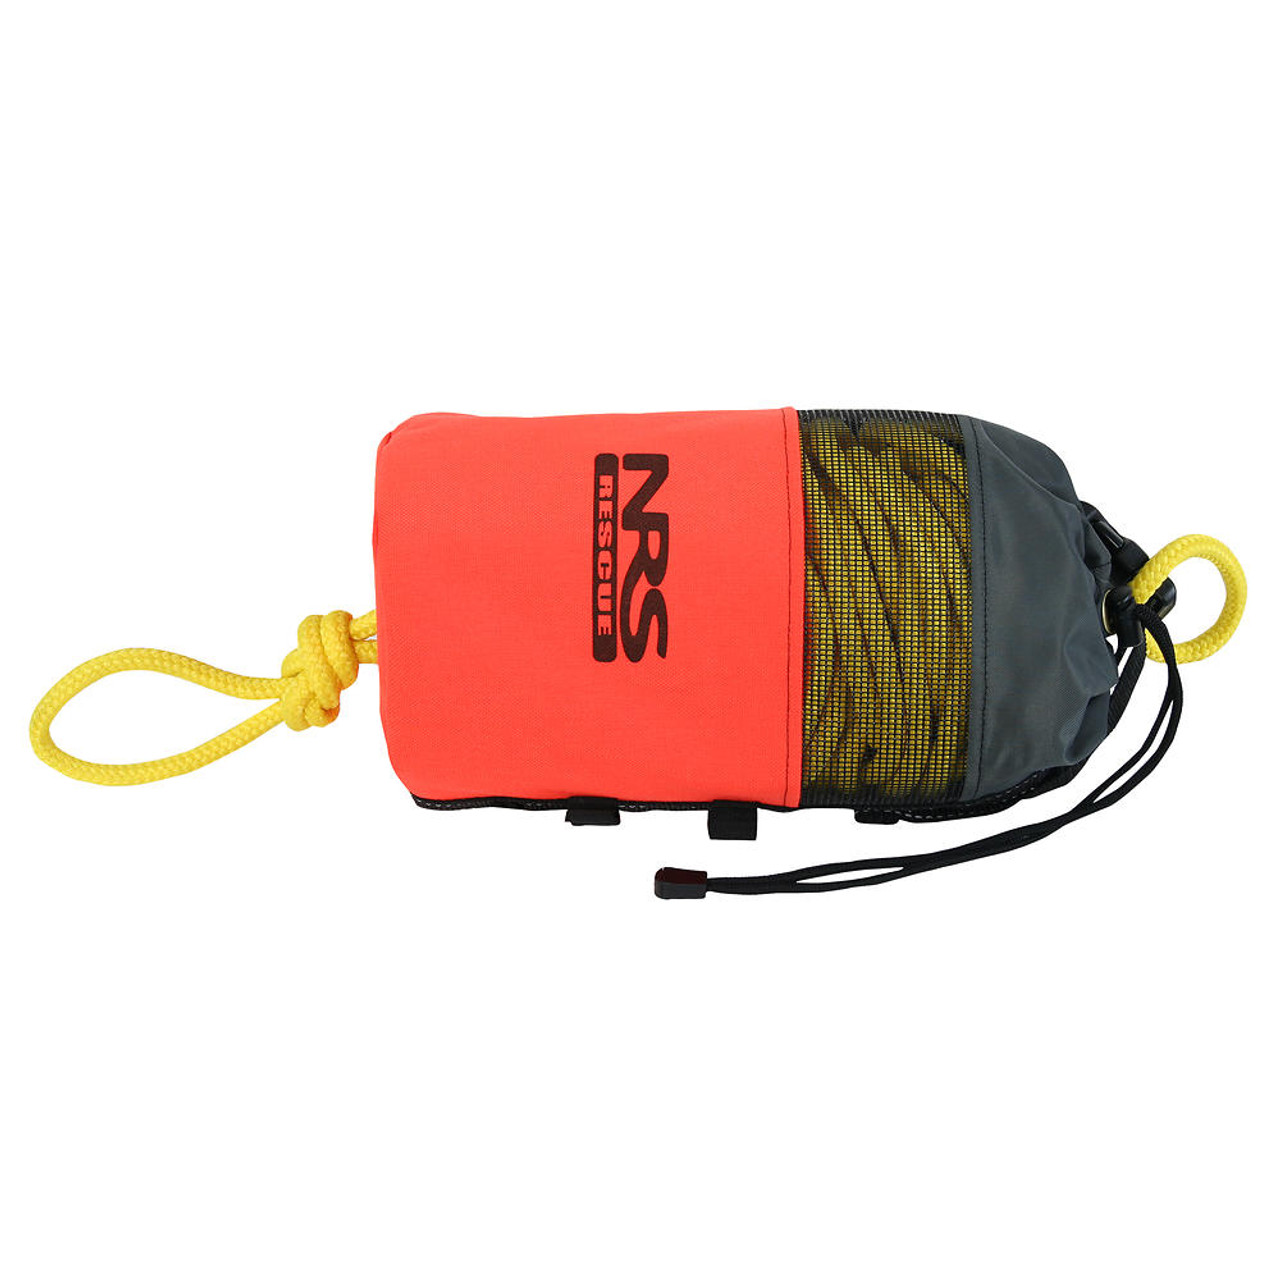 NRS Pro Compact Rescue Throw Rope（並行輸入品） - 登山